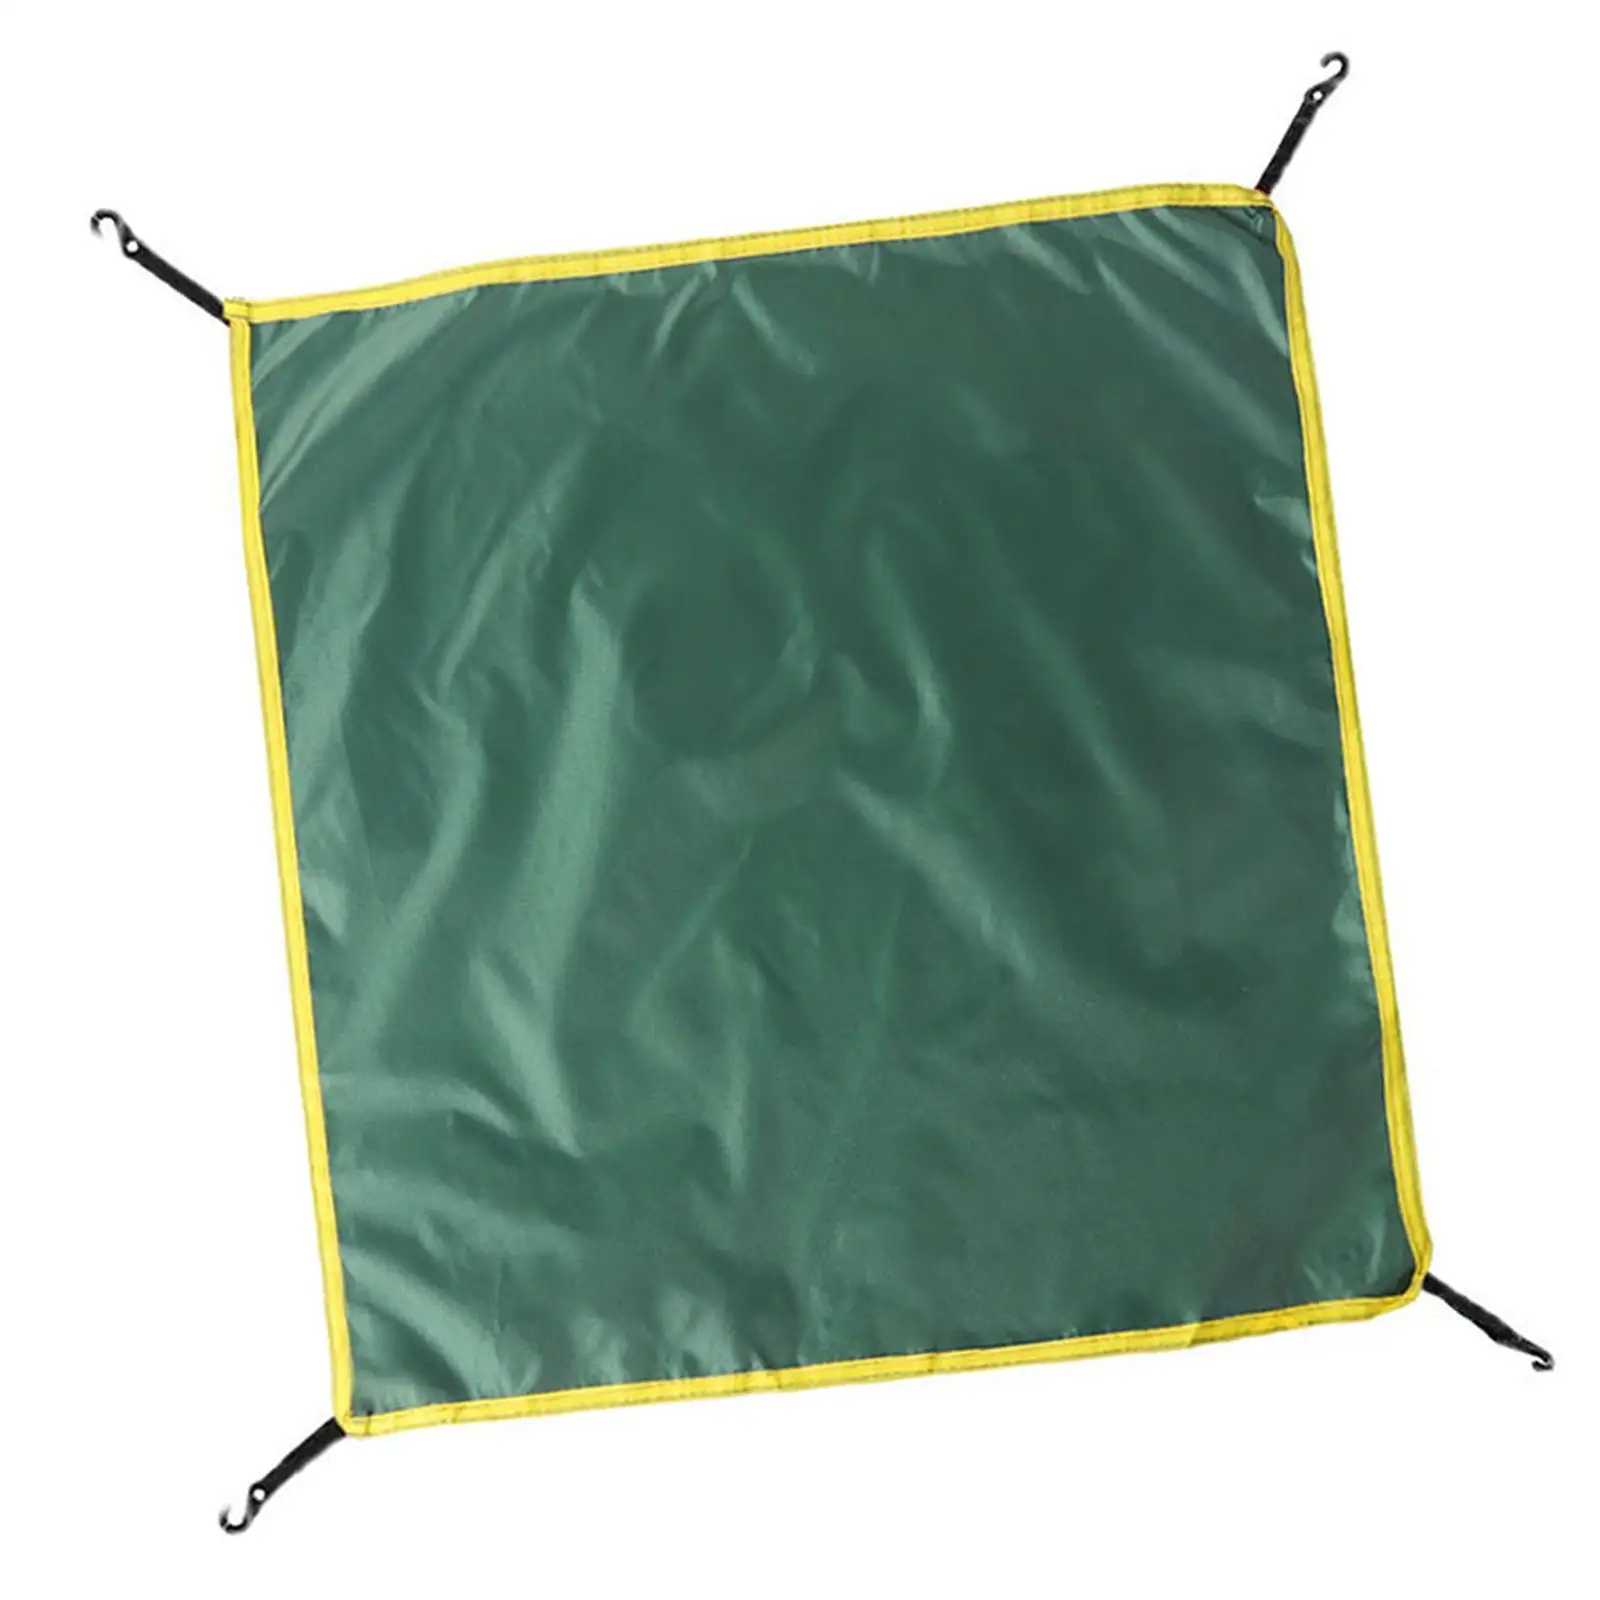 Rainfly Accessory Lightweight Tent Tarp Fits 3-4 Person Automatic Tent Tent Top Cover, Rain Fly Cloth for Camping Hiking